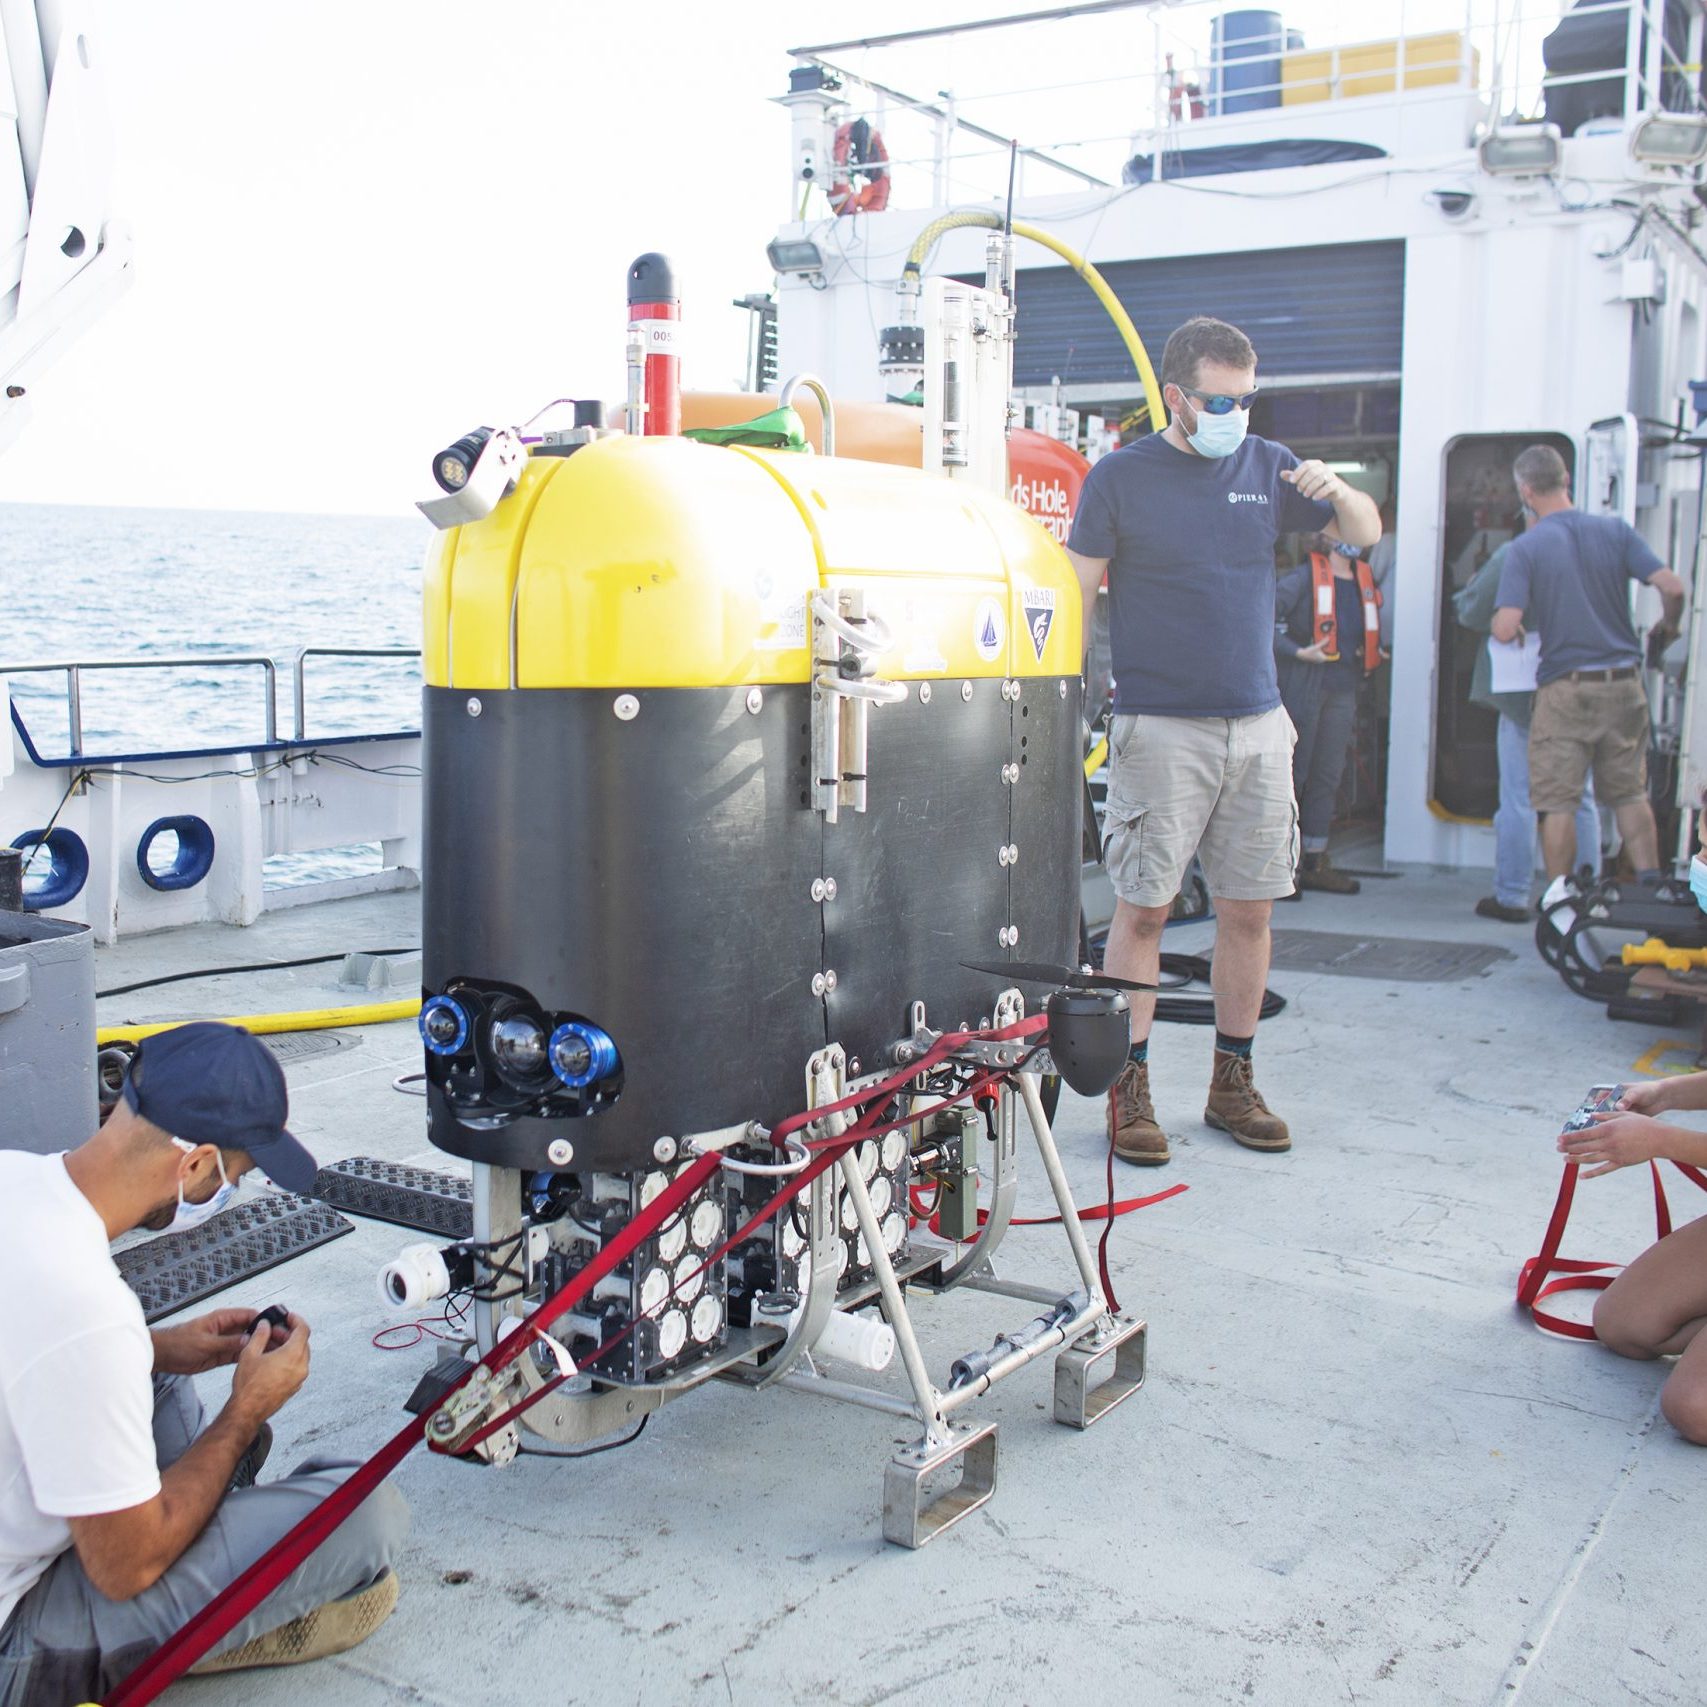 The Mesobot team begins the pre-dive routine, removing safety straps and checking equipment, on the aft deck of E/V Nautilus. (Photo: OET/Nautilus Live)